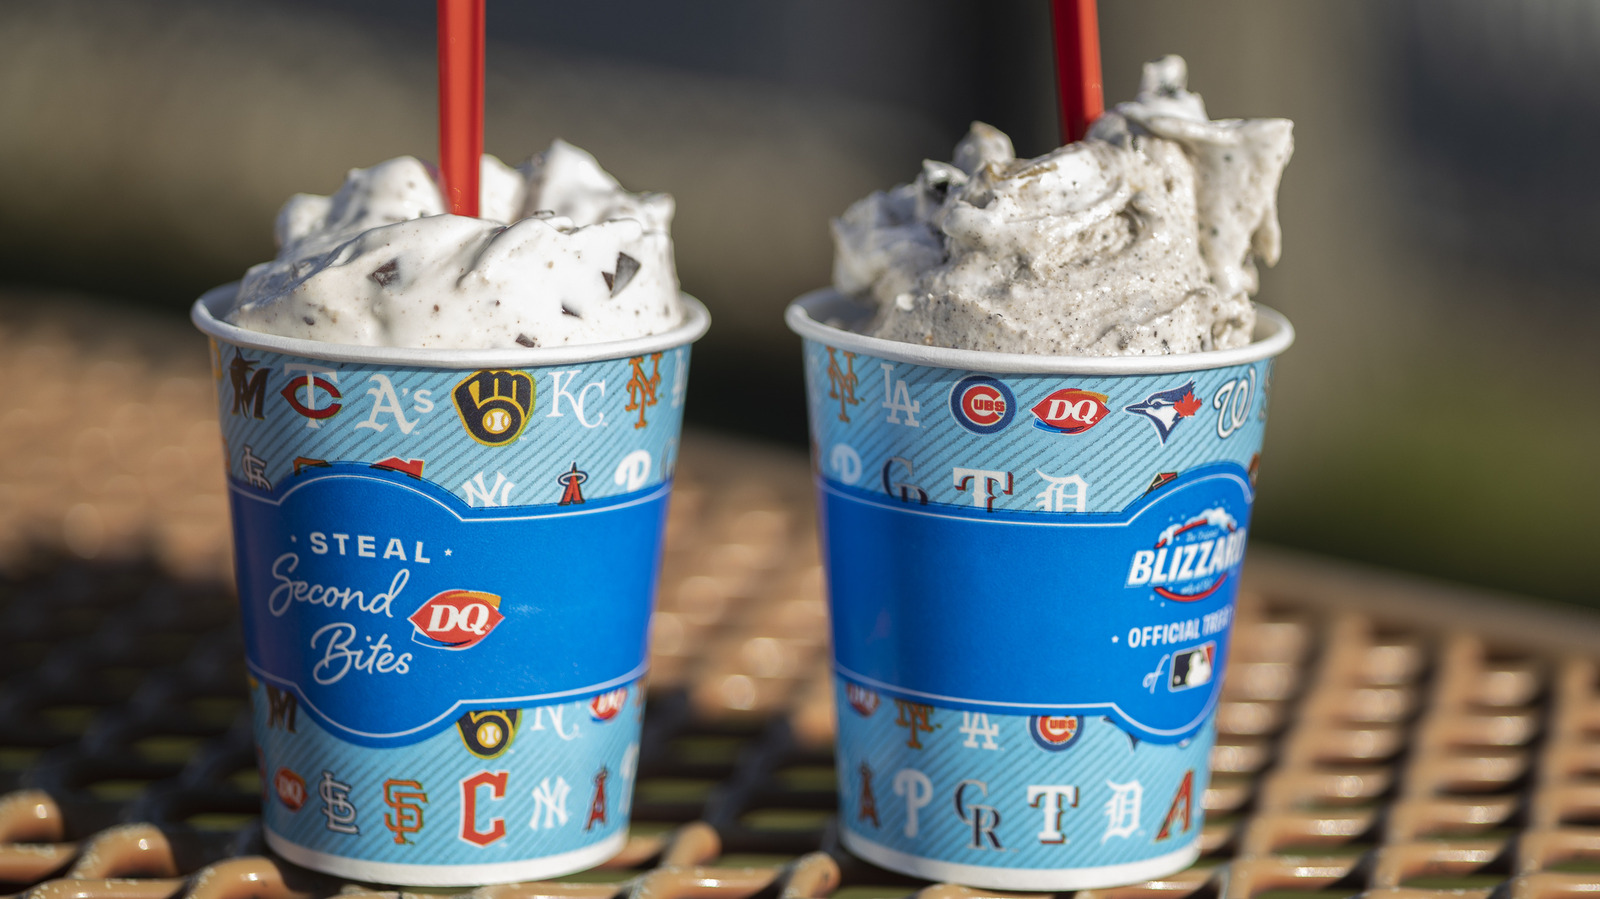 Blizzards from Dairy Queen